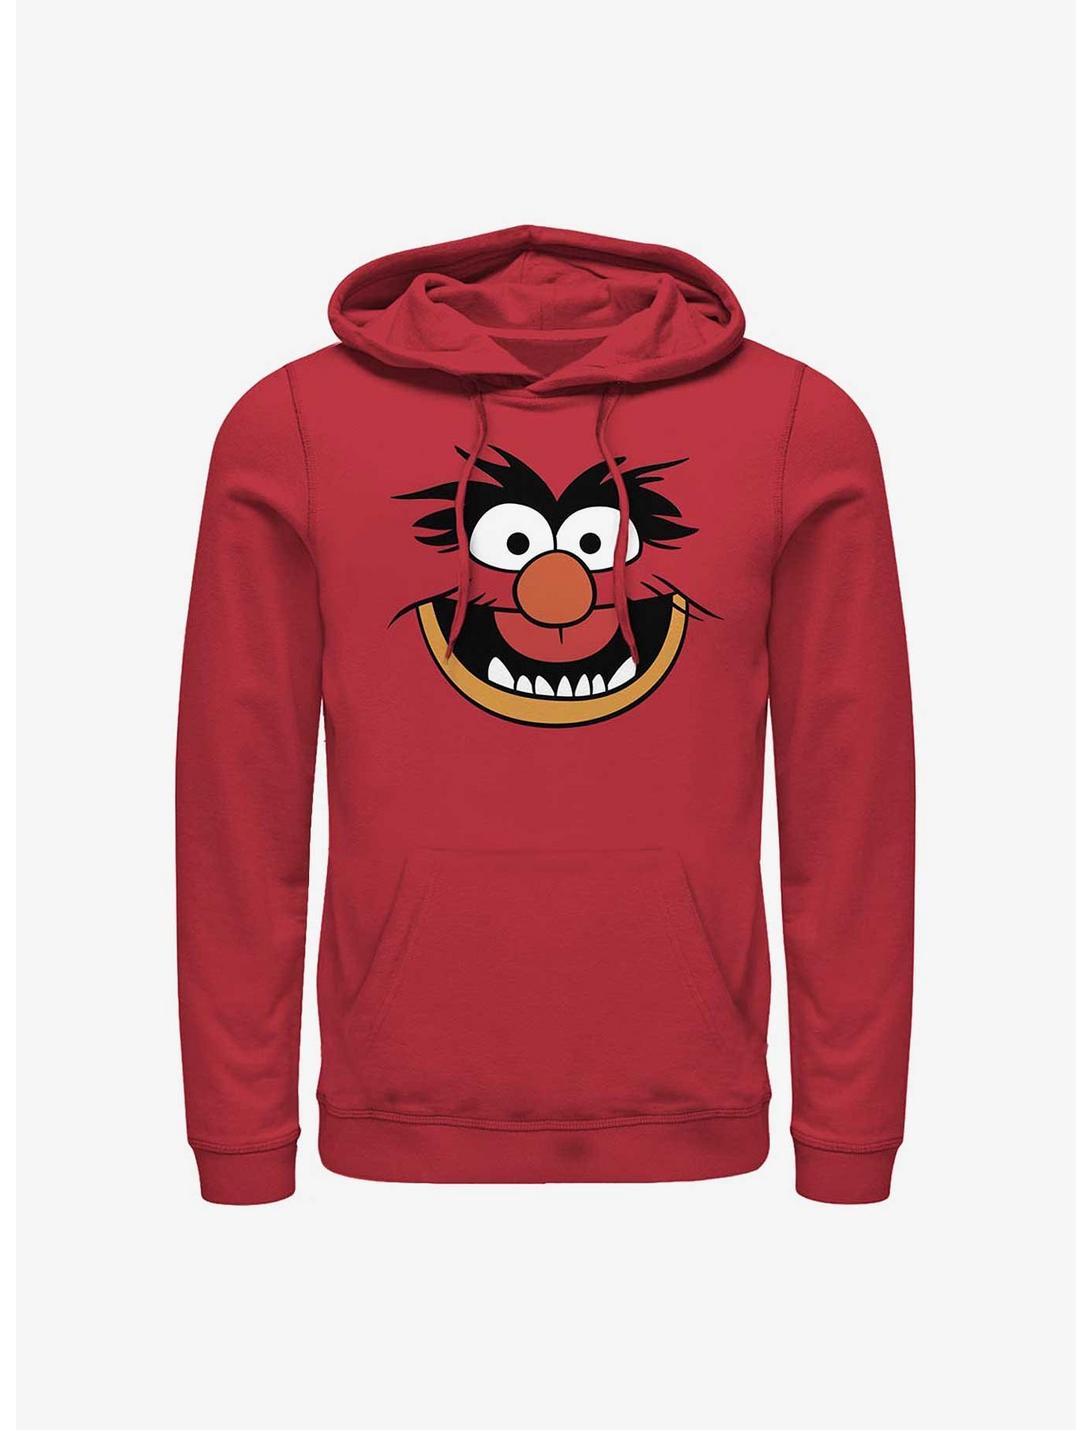 Disney The Muppets Animal Costume Hoodie, RED, hi-res